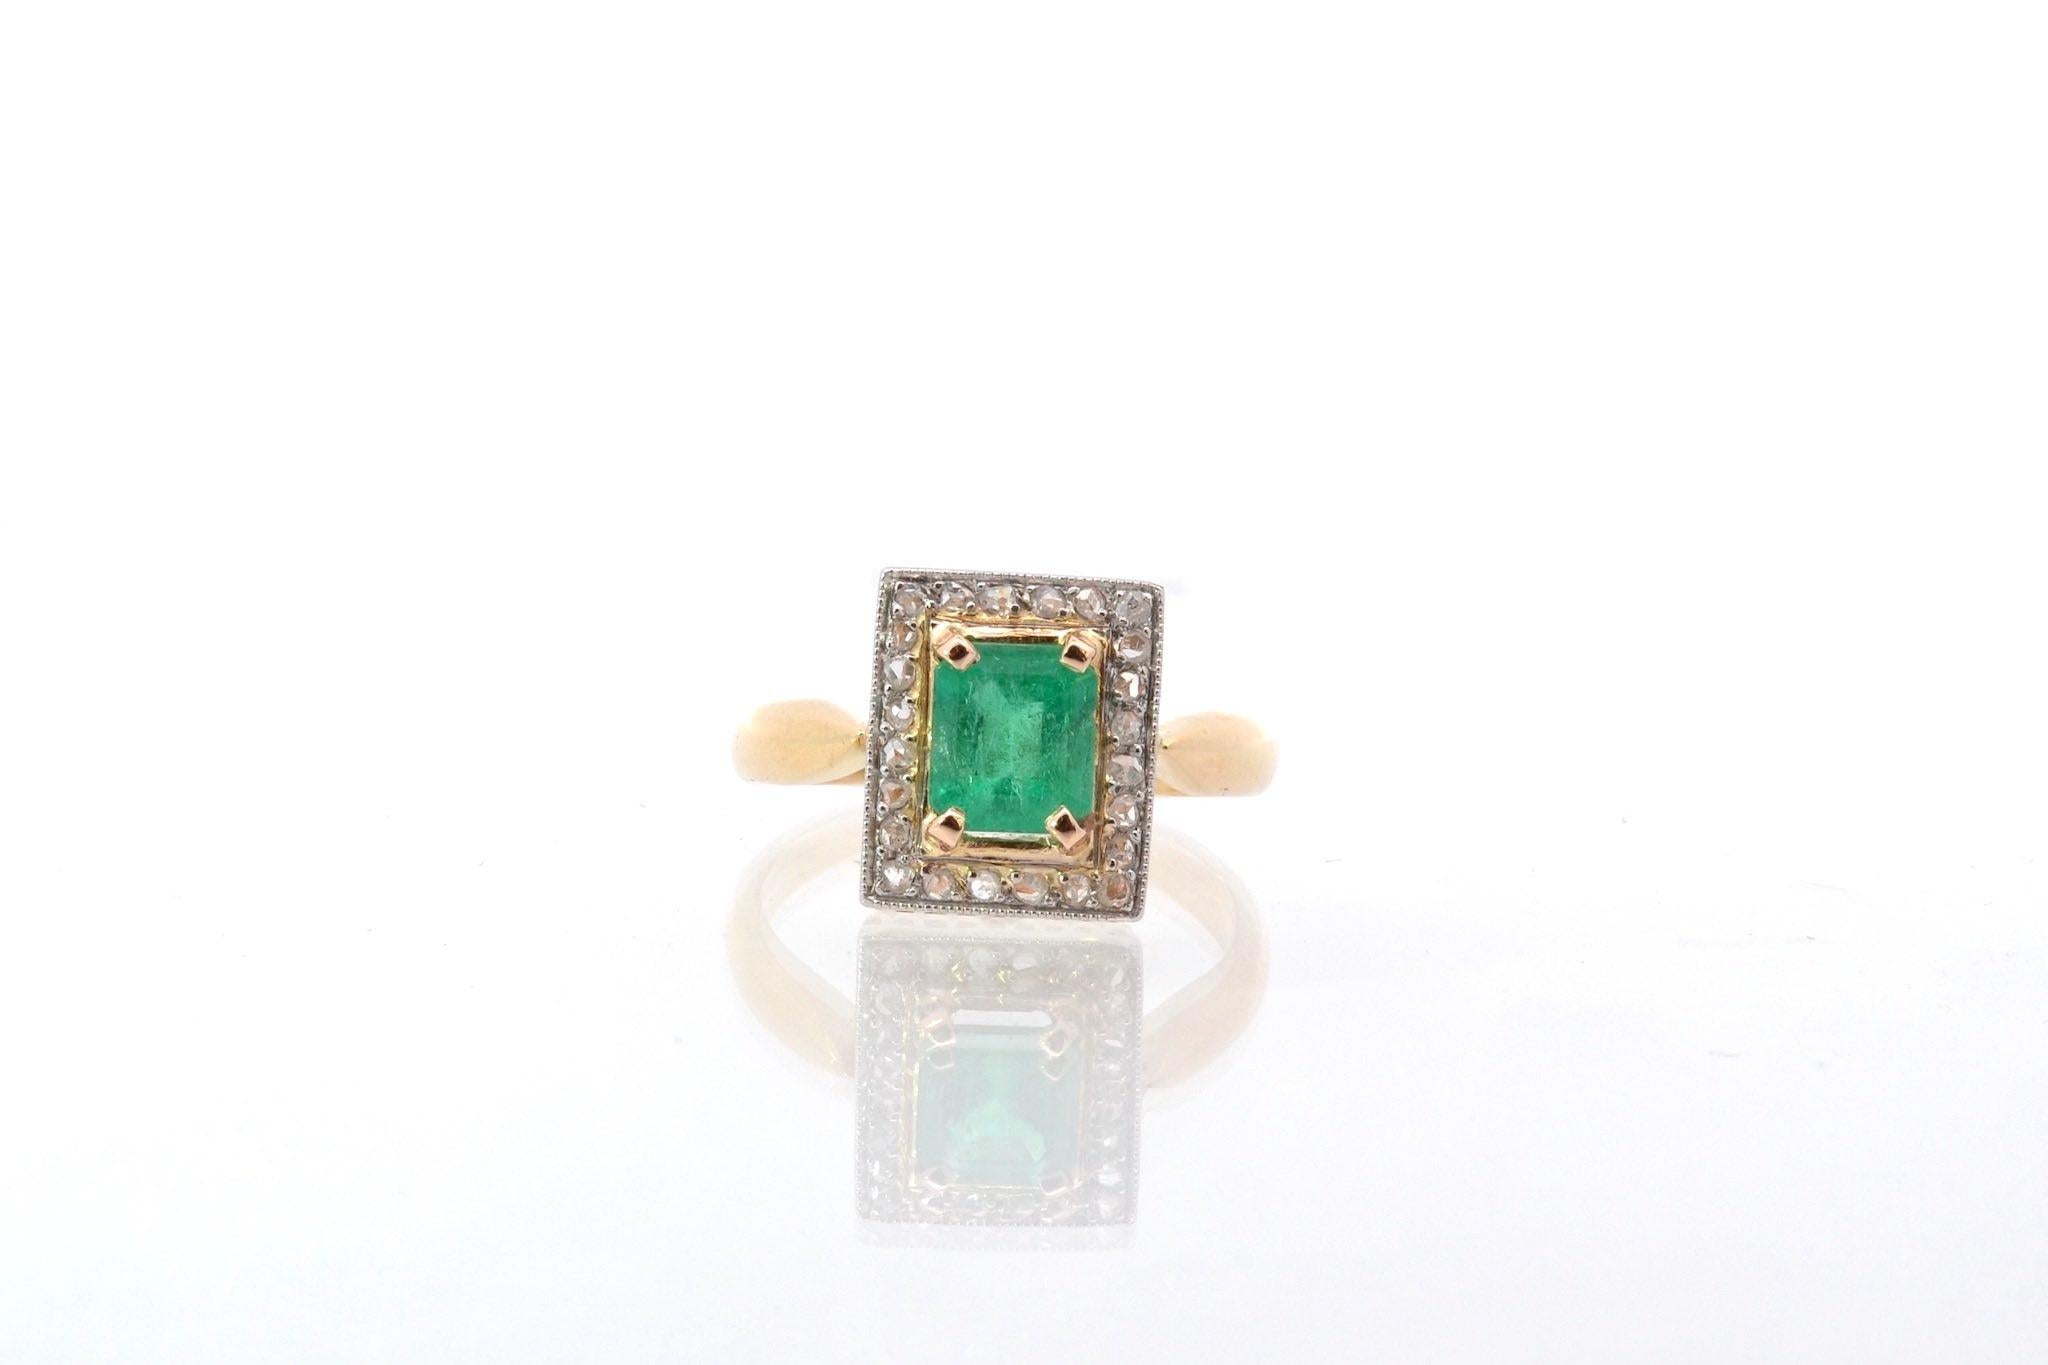 Stones: Emerald: 1 ct and 24 pink diamonds: 0.20 ct
Material: 18k yellow gold and platinum
Dimensions: 1.2cm x 1cm
Weight: 3.9g
Period: Recent vintage art deco style
Size: 53 (free sizing)
Certificate
Ref. : 25548